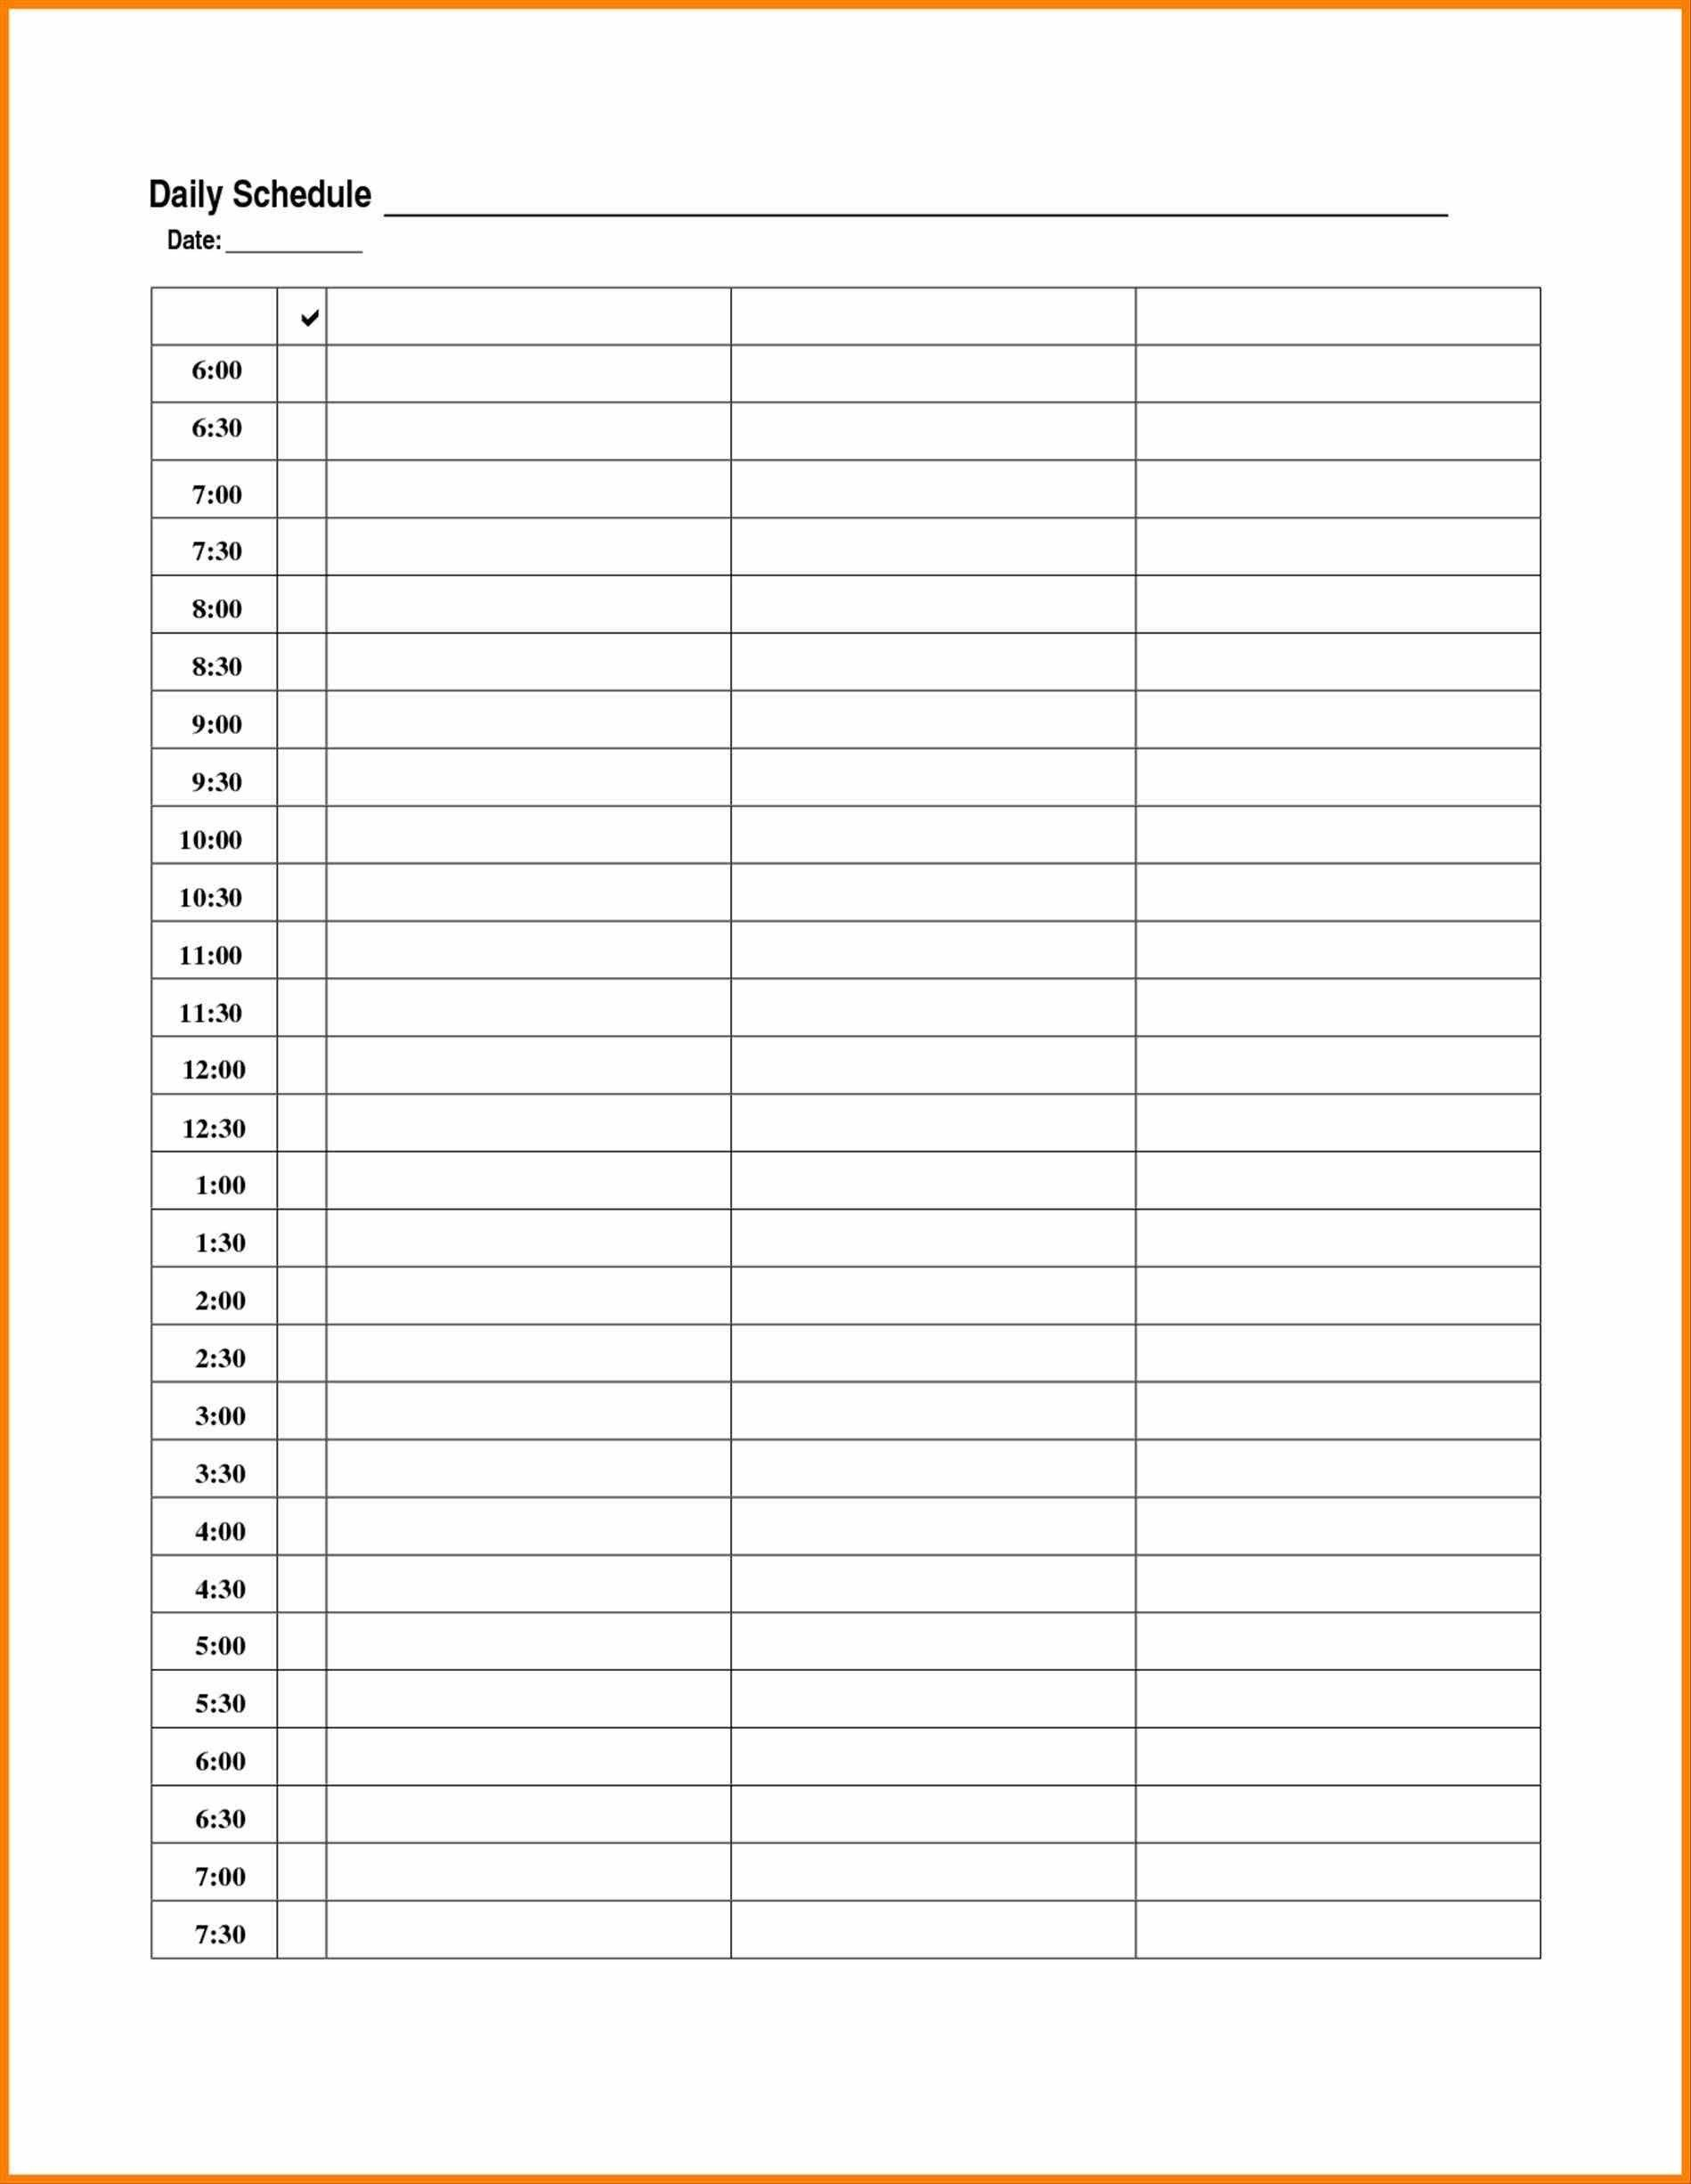 Daily Calendar Excel Template Free Printable | Monthly